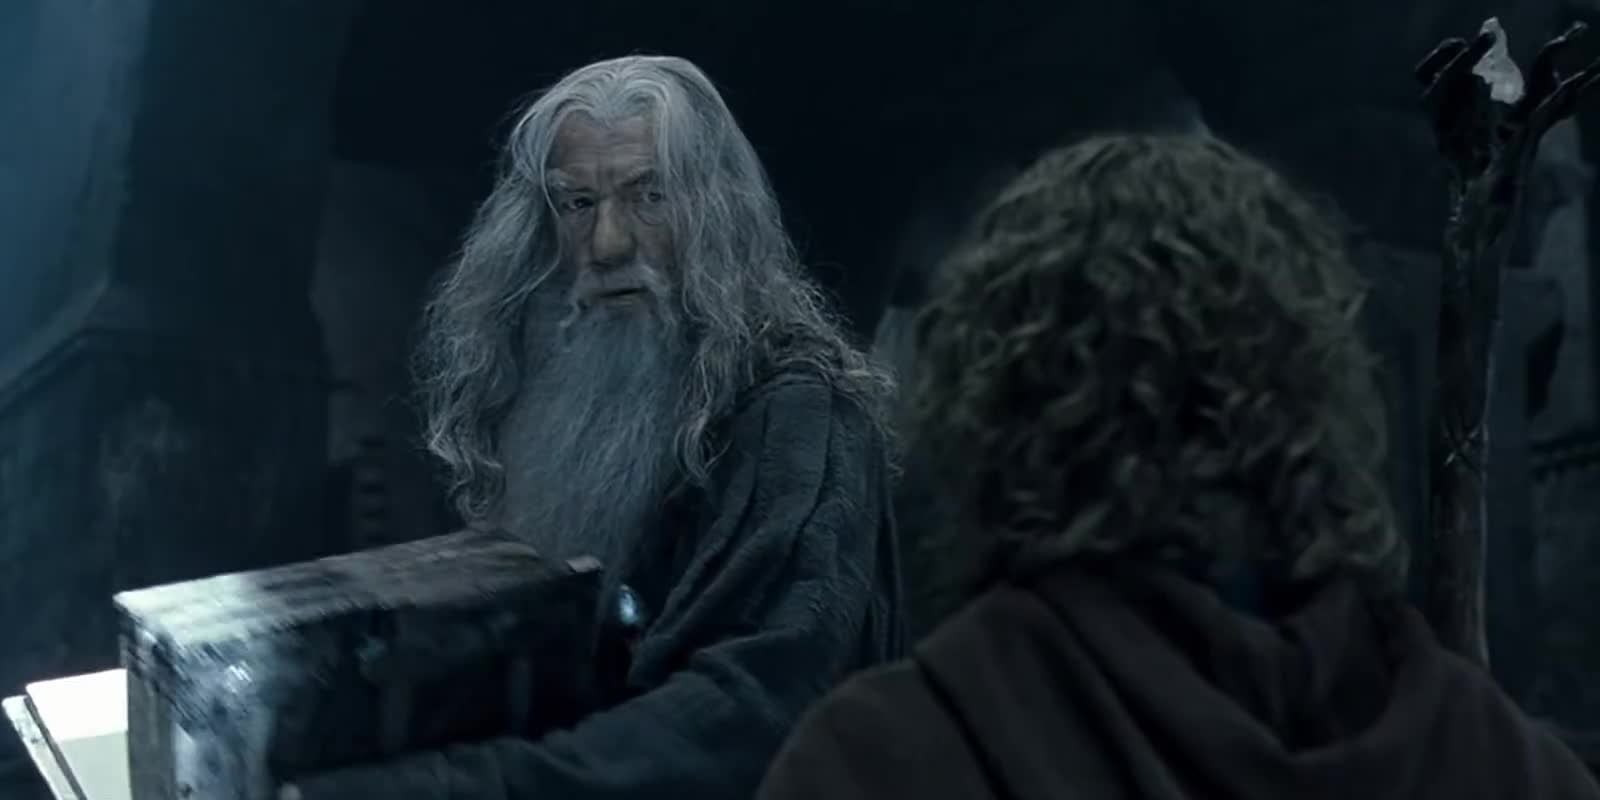 Gandalf (Ian McKellan) calls Pippin (Billy Boyd) a Fool of a Took in Lord of the Rings